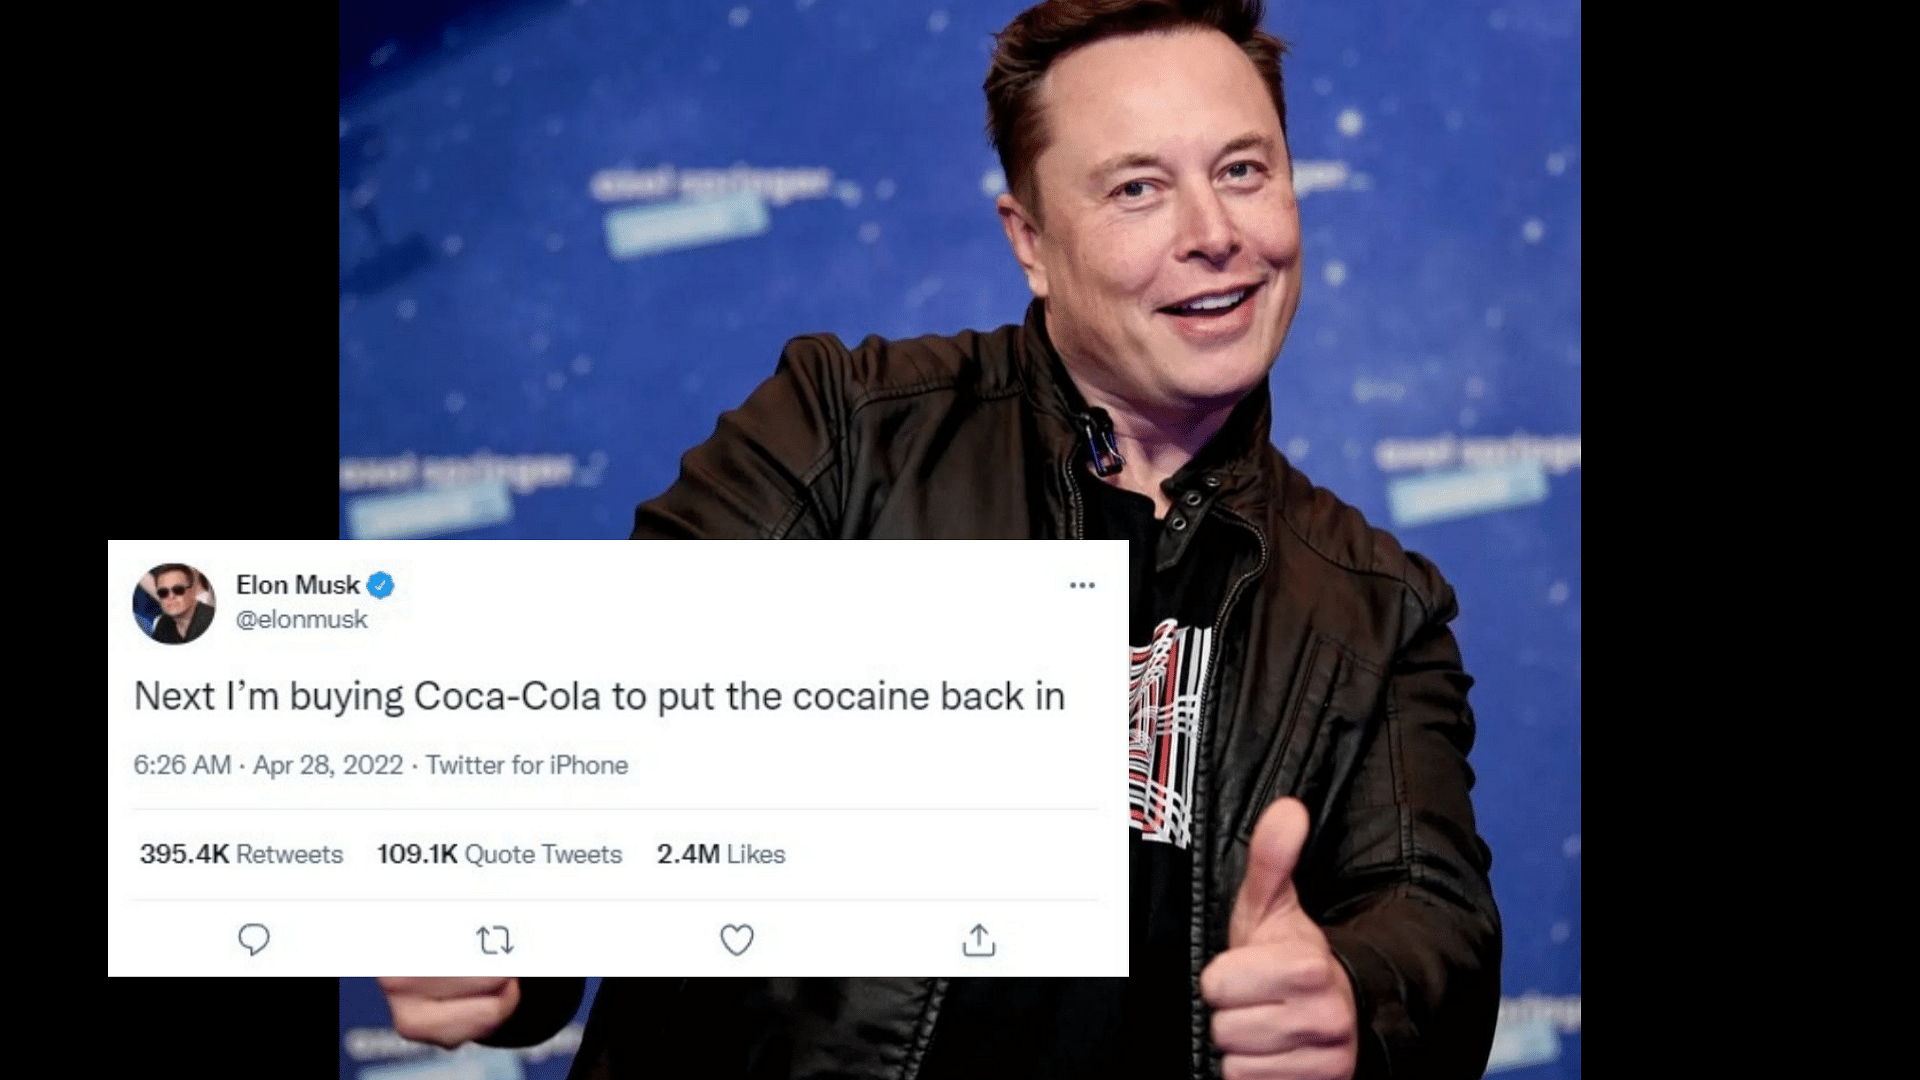 <div class="paragraphs"><p>Elon Musk tweets he's next going to buy Coca-Cola to put the cocaine back in</p></div>